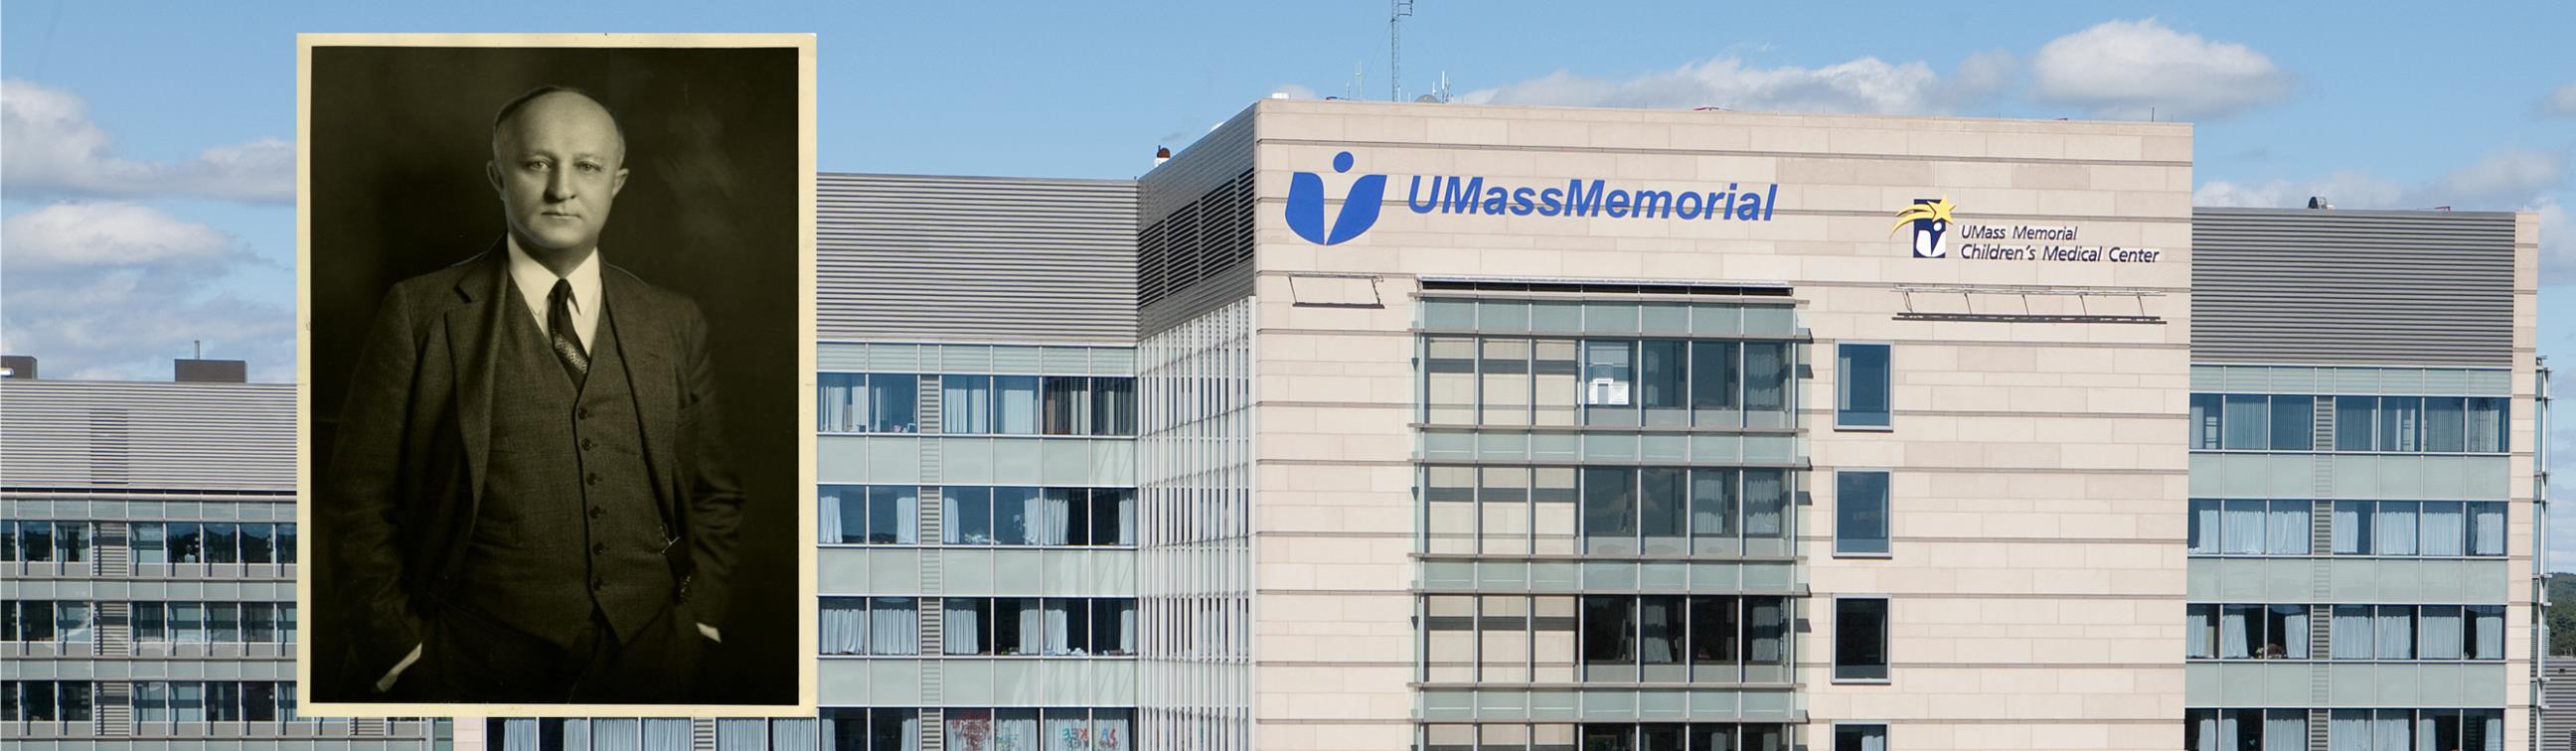 UMass Memorial Medical Center receives $9.8 million gift to benefit patients